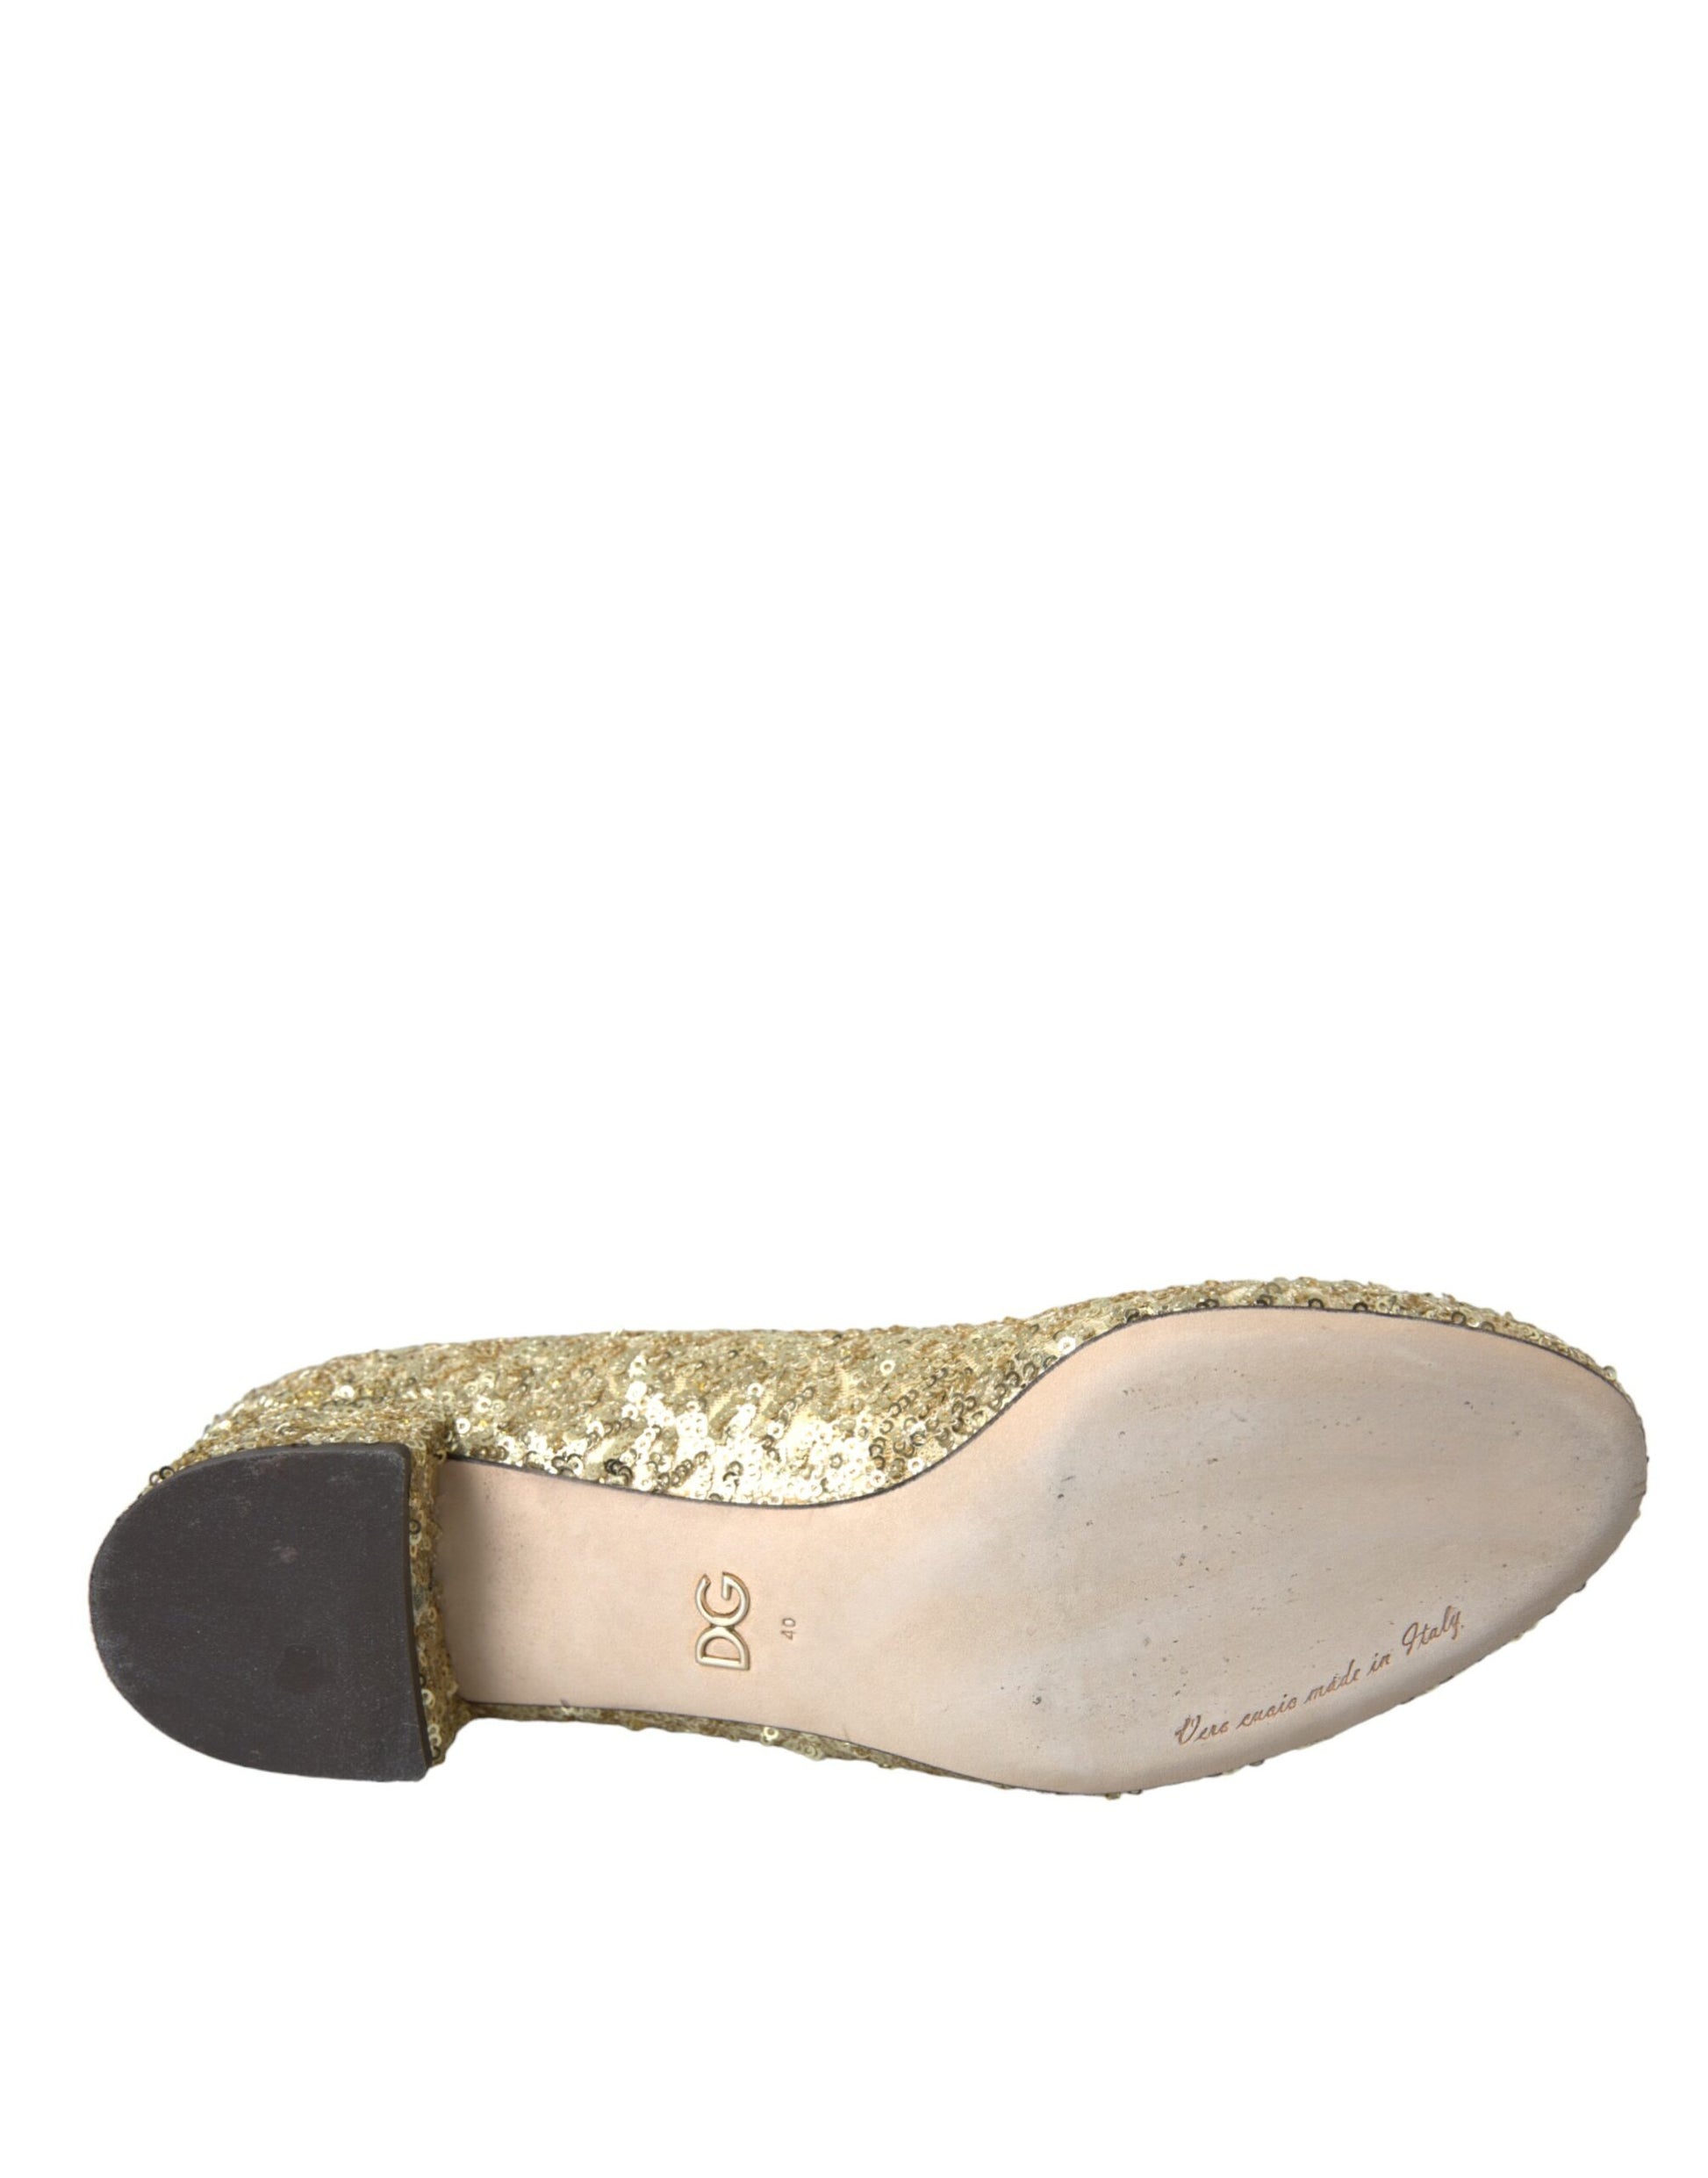 Gold Sequined Short Boots Stretch Shoes